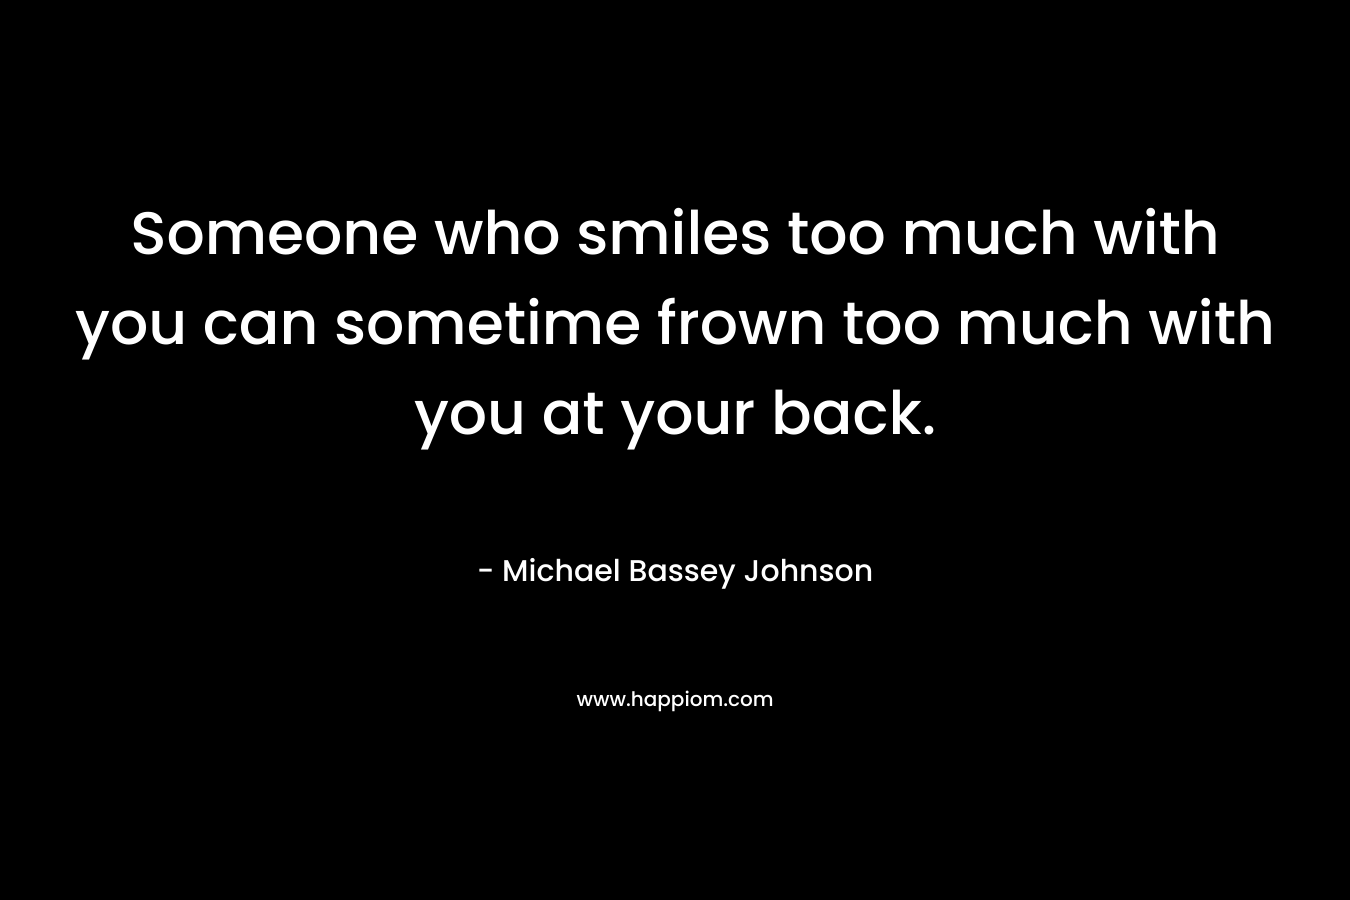 Someone who smiles too much with you can sometime frown too much with you at your back. – Michael Bassey Johnson